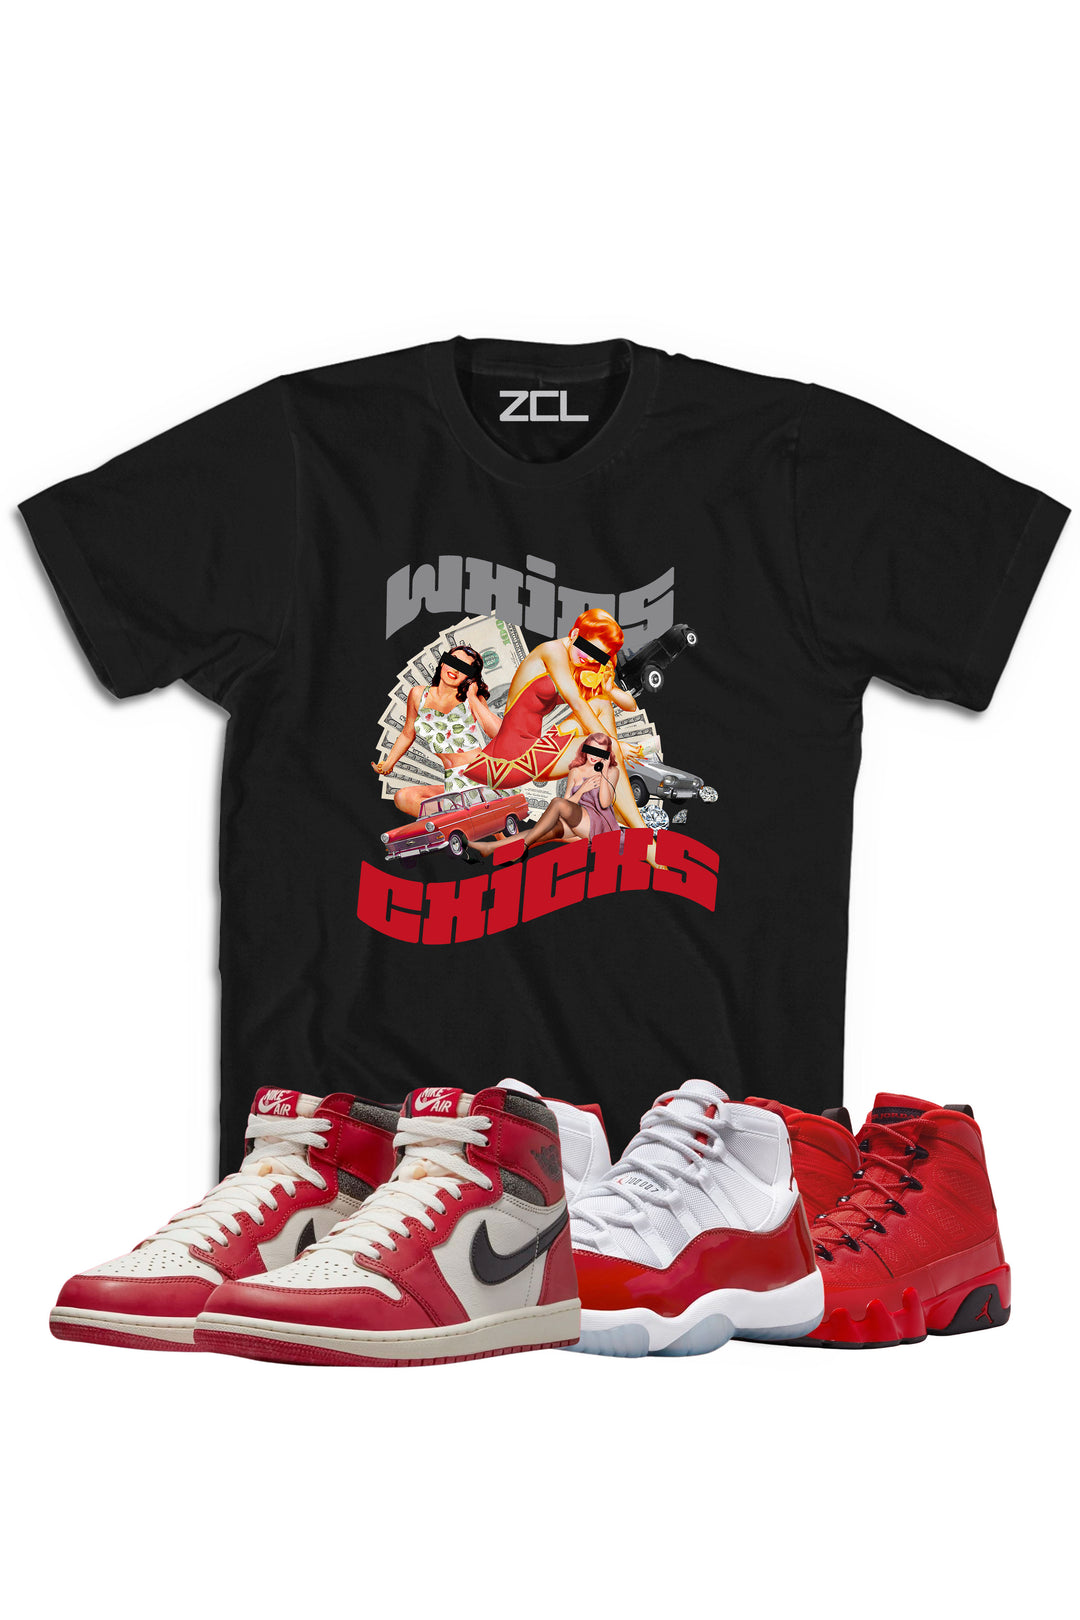 Air Jordan "Whips & Chicks" Tee Lost & Found - Cherry Red - Zamage